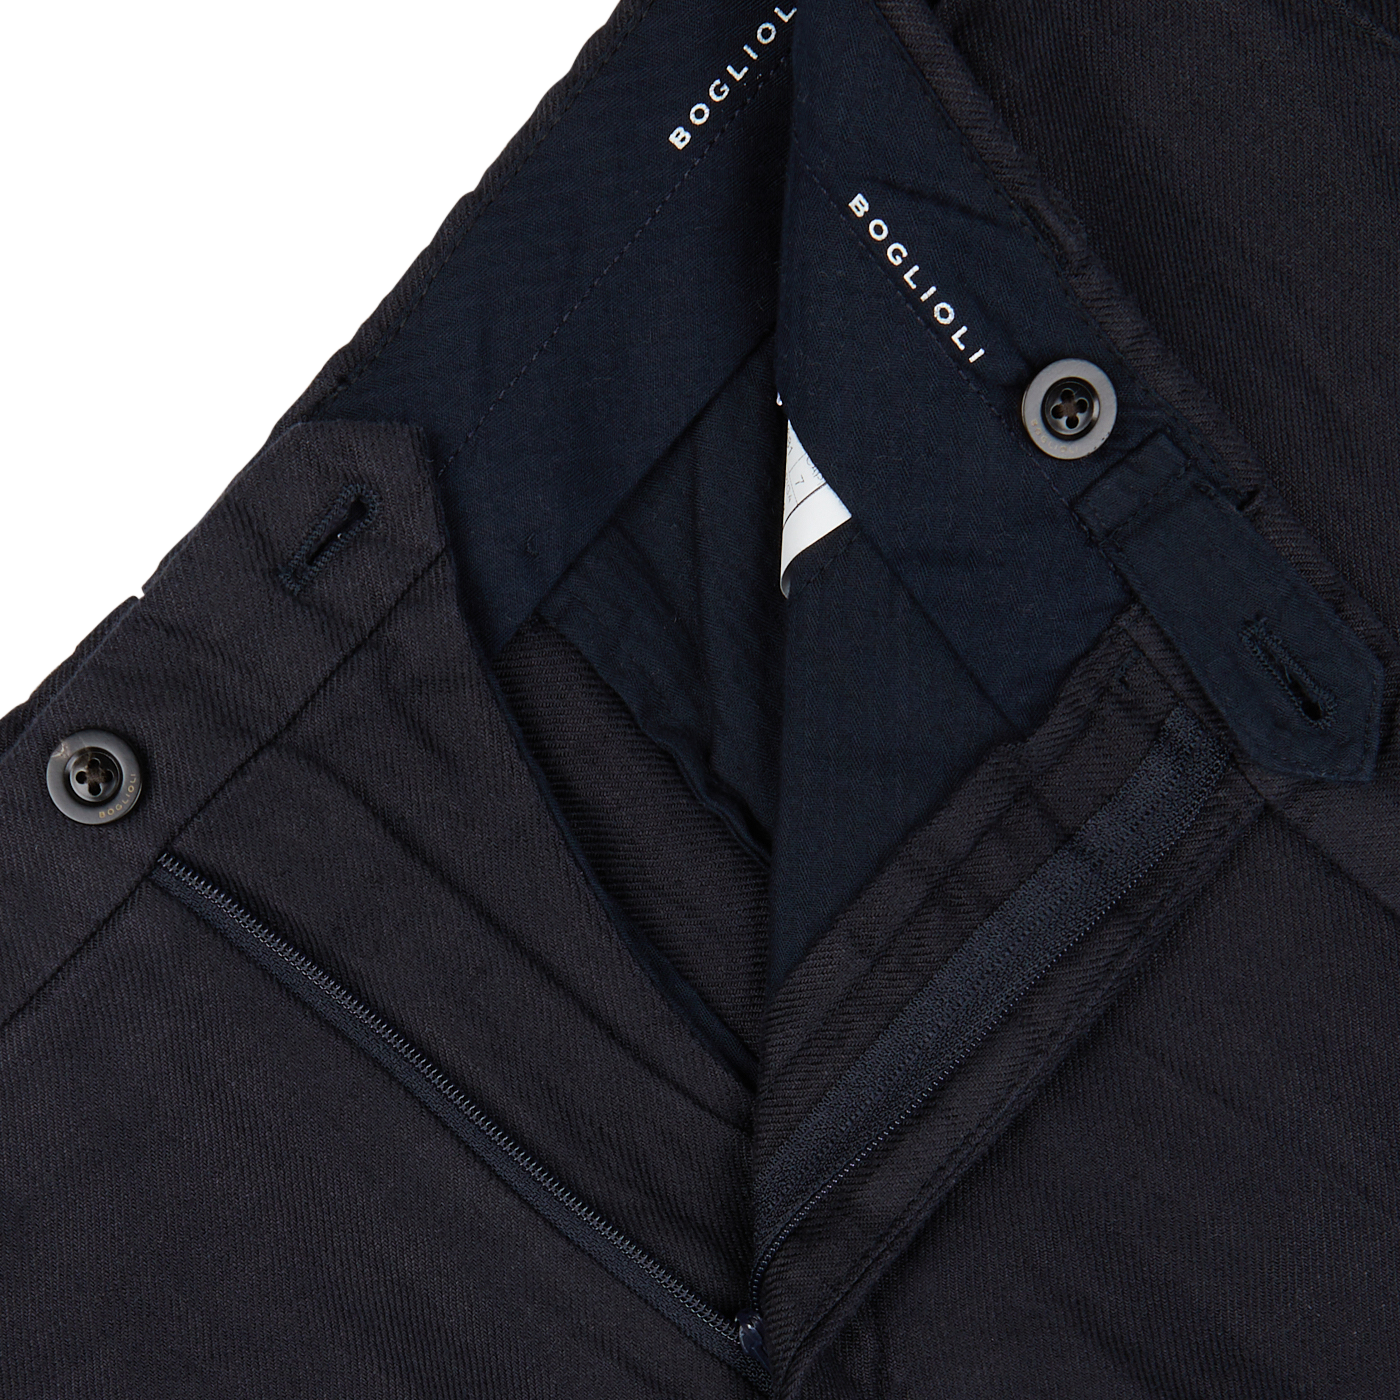 Close-up of Boglioli Navy Blue Washed Irish Linen Trousers with a zipper and buttons visible on pure linen, textured fabric.